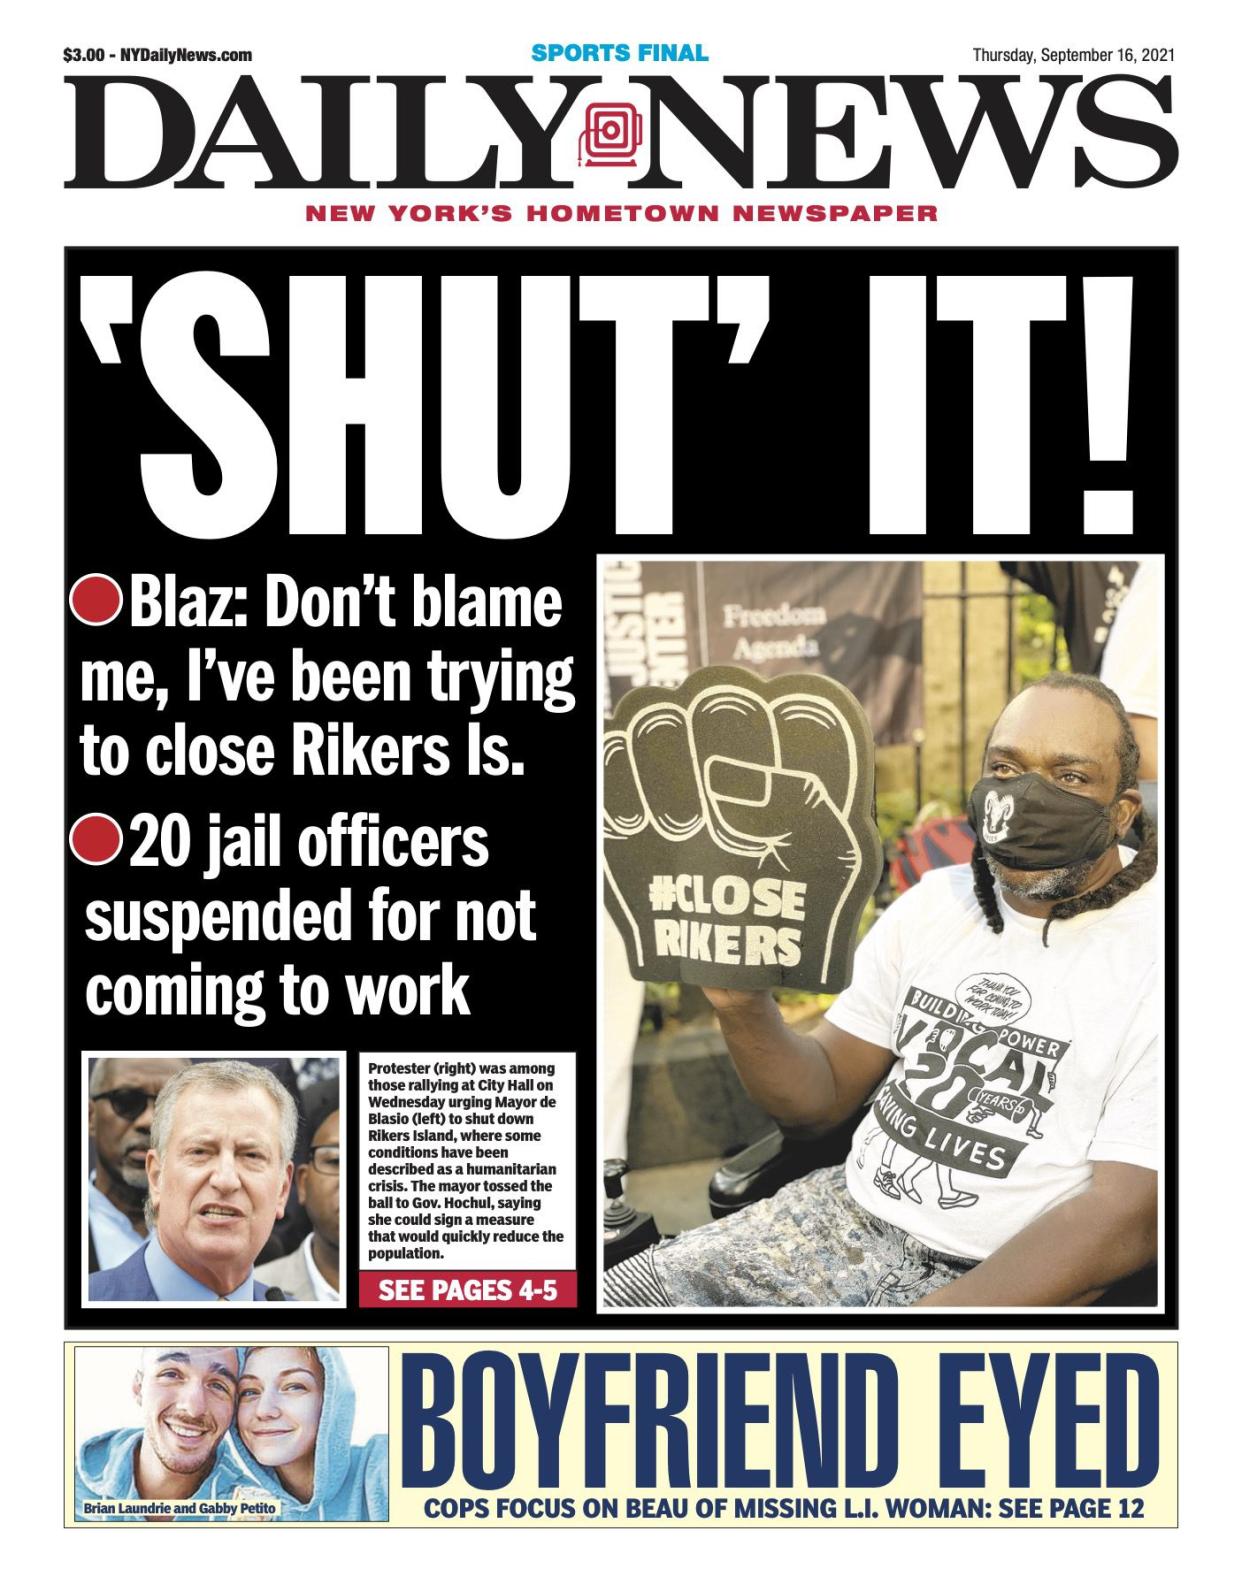 Front page for Sept. 16, 2021: Blaz: Don't blame me, I've been trying to close Rikers Is. 20 jail officers suspended for not coming to work. Protester (right) was among those rallying at City Hall on Wednesday urging Mayor de Blasio (left) to shut down Rikers Island, where some conditions have been described as a humanitarian crisis. The mayor tossed the ball to Gov. Hochul, saying she could sign a measure that would quickly reduce the population. 